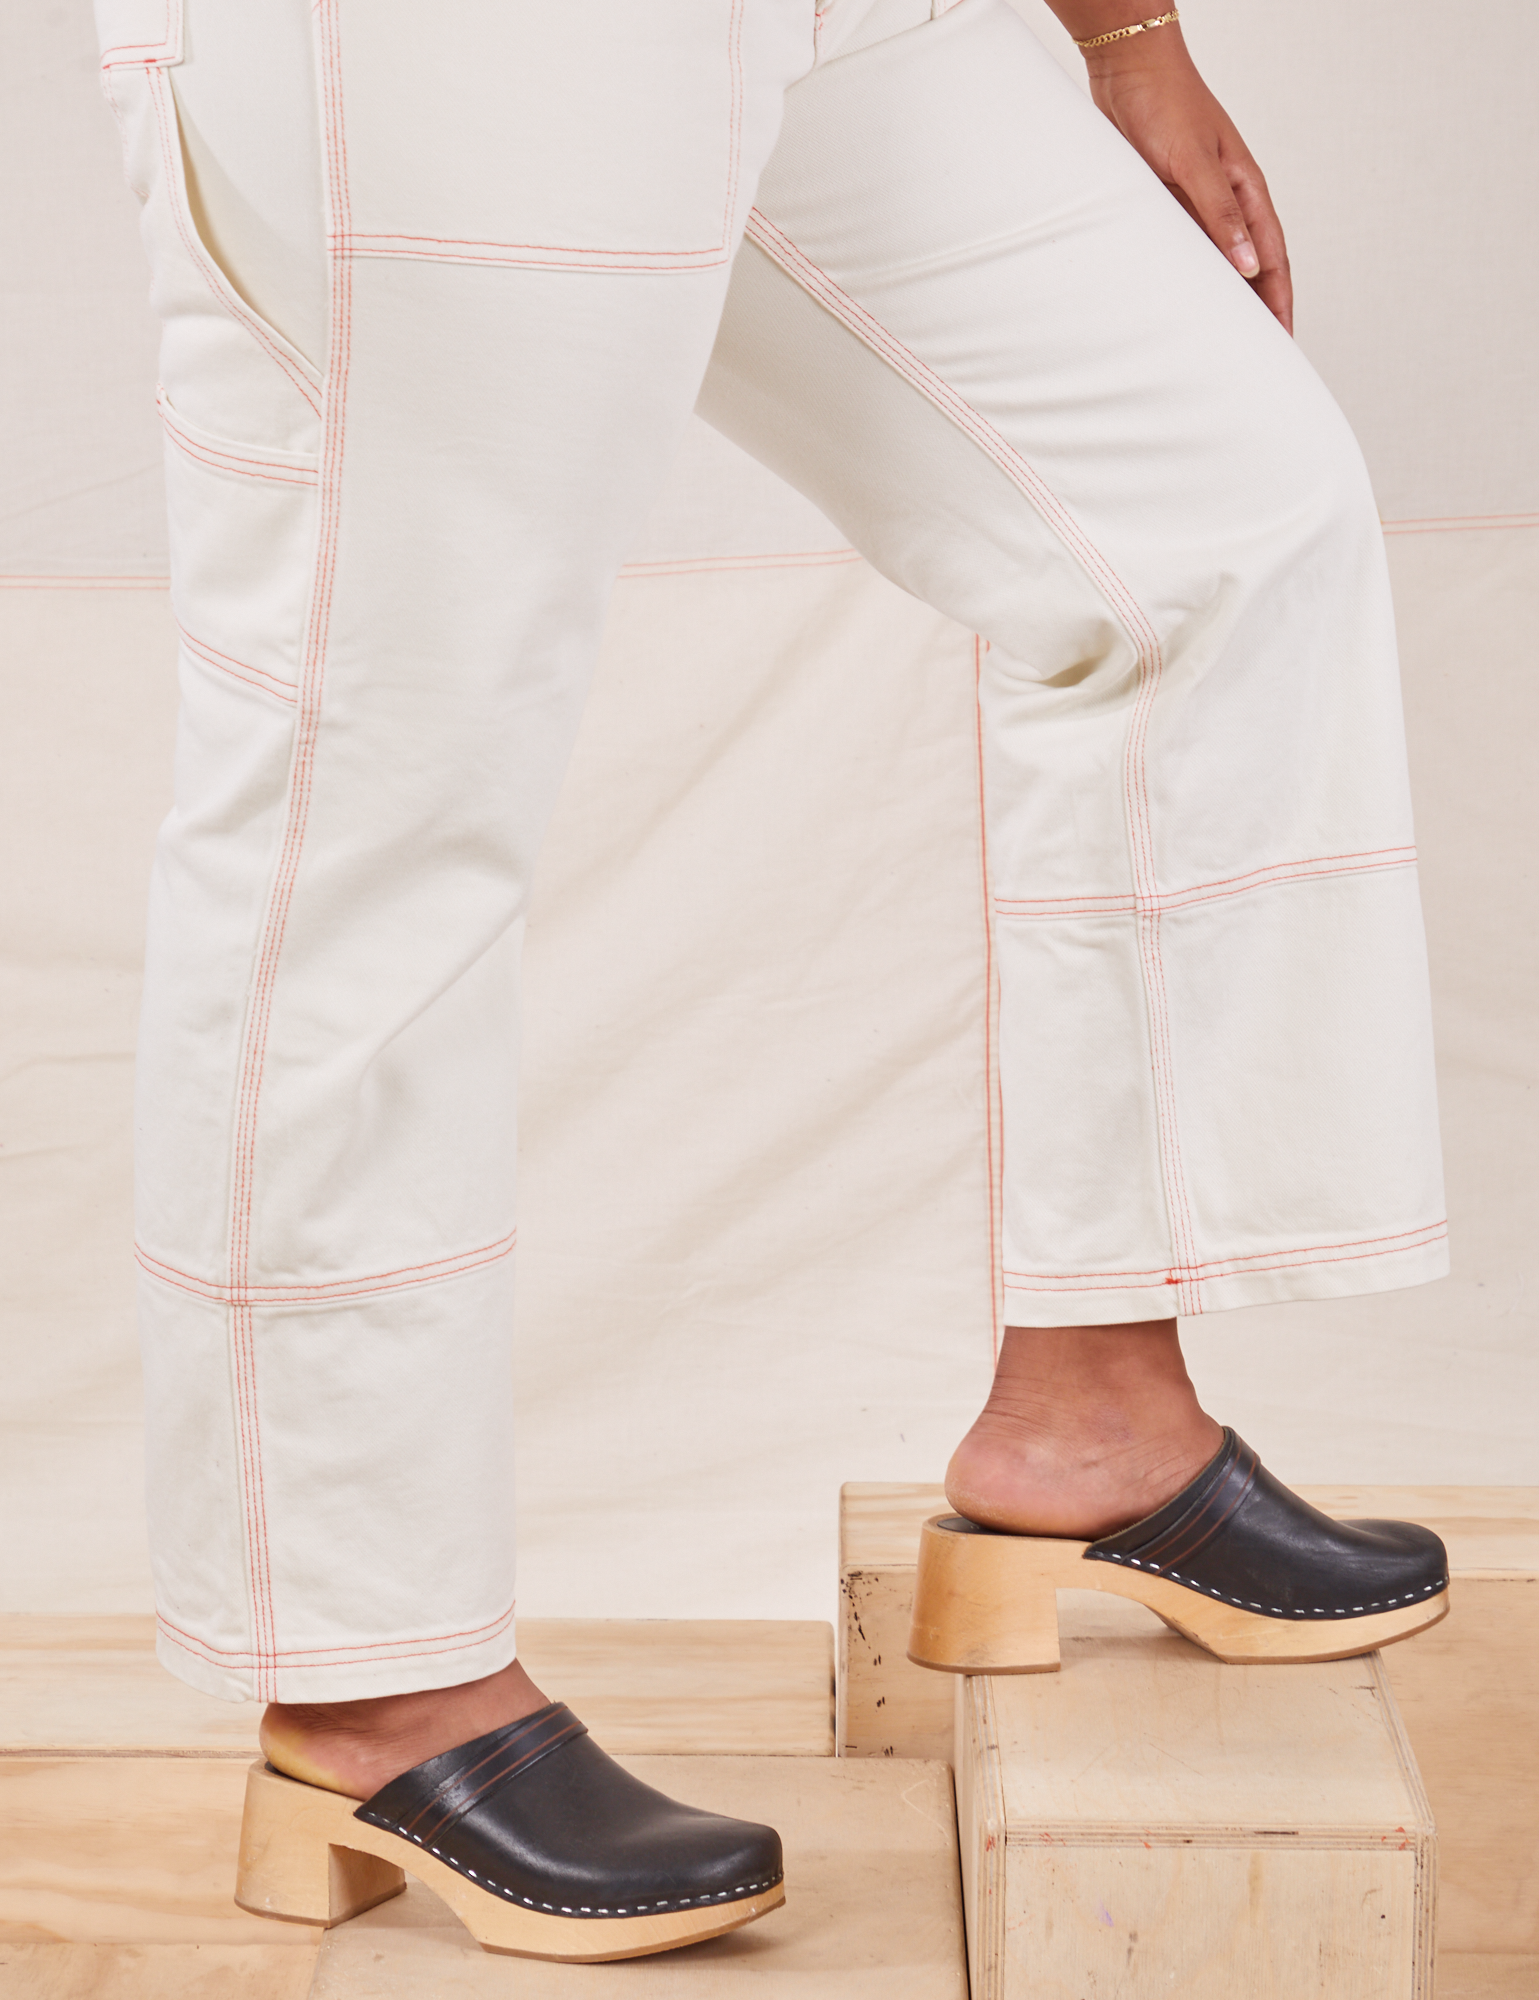 Carpenter Jeans in Vintage Off-White pant side view close up on Meghna